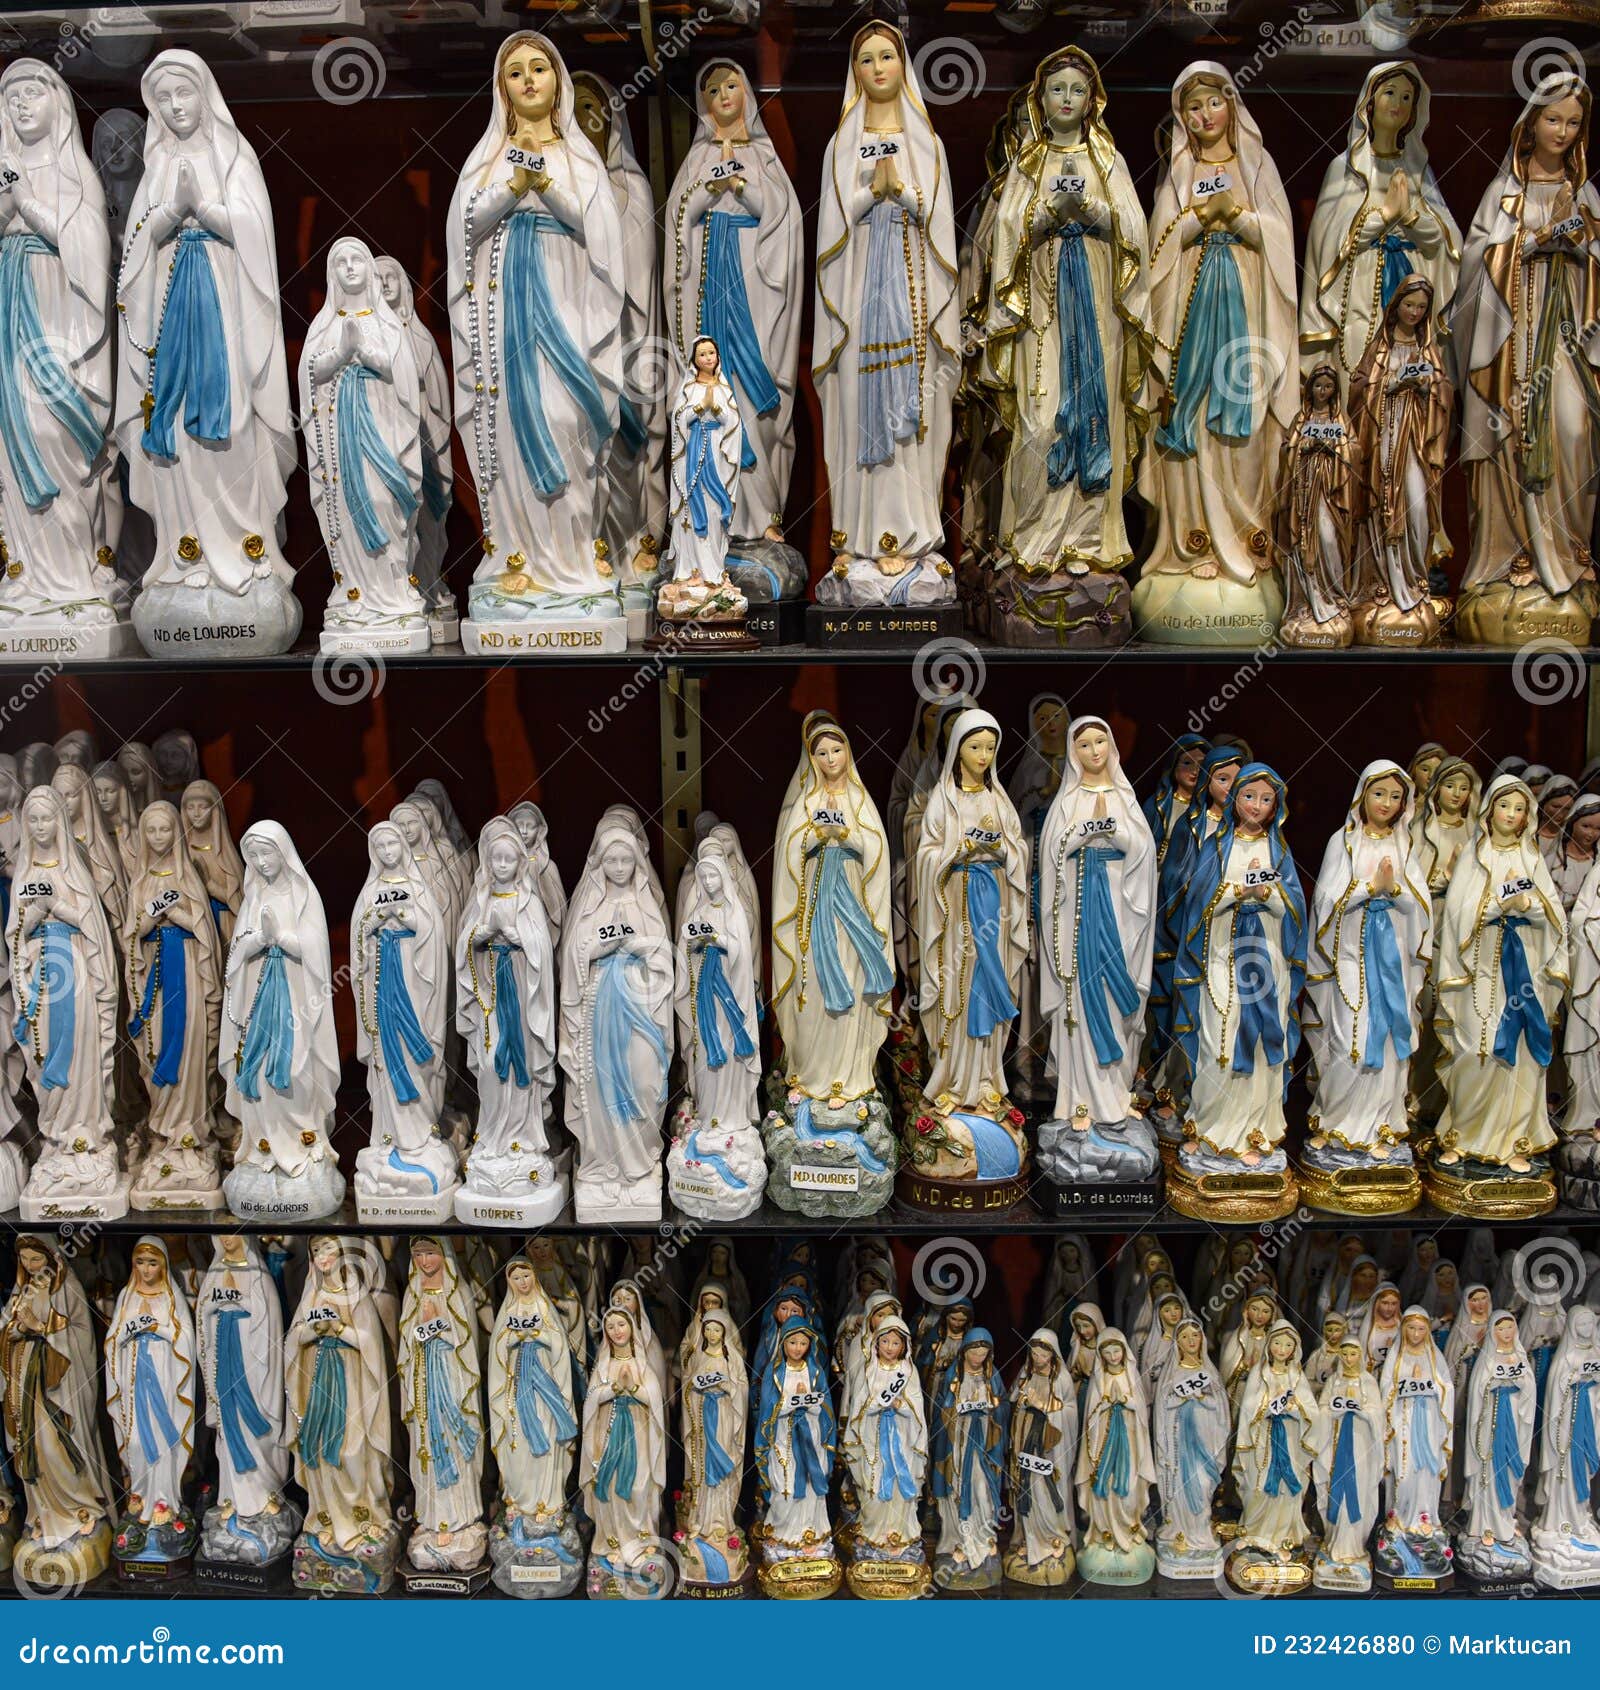 Figurine Statues of the Virgin Mary on Sale at a Tourist Souvenir Shop ...